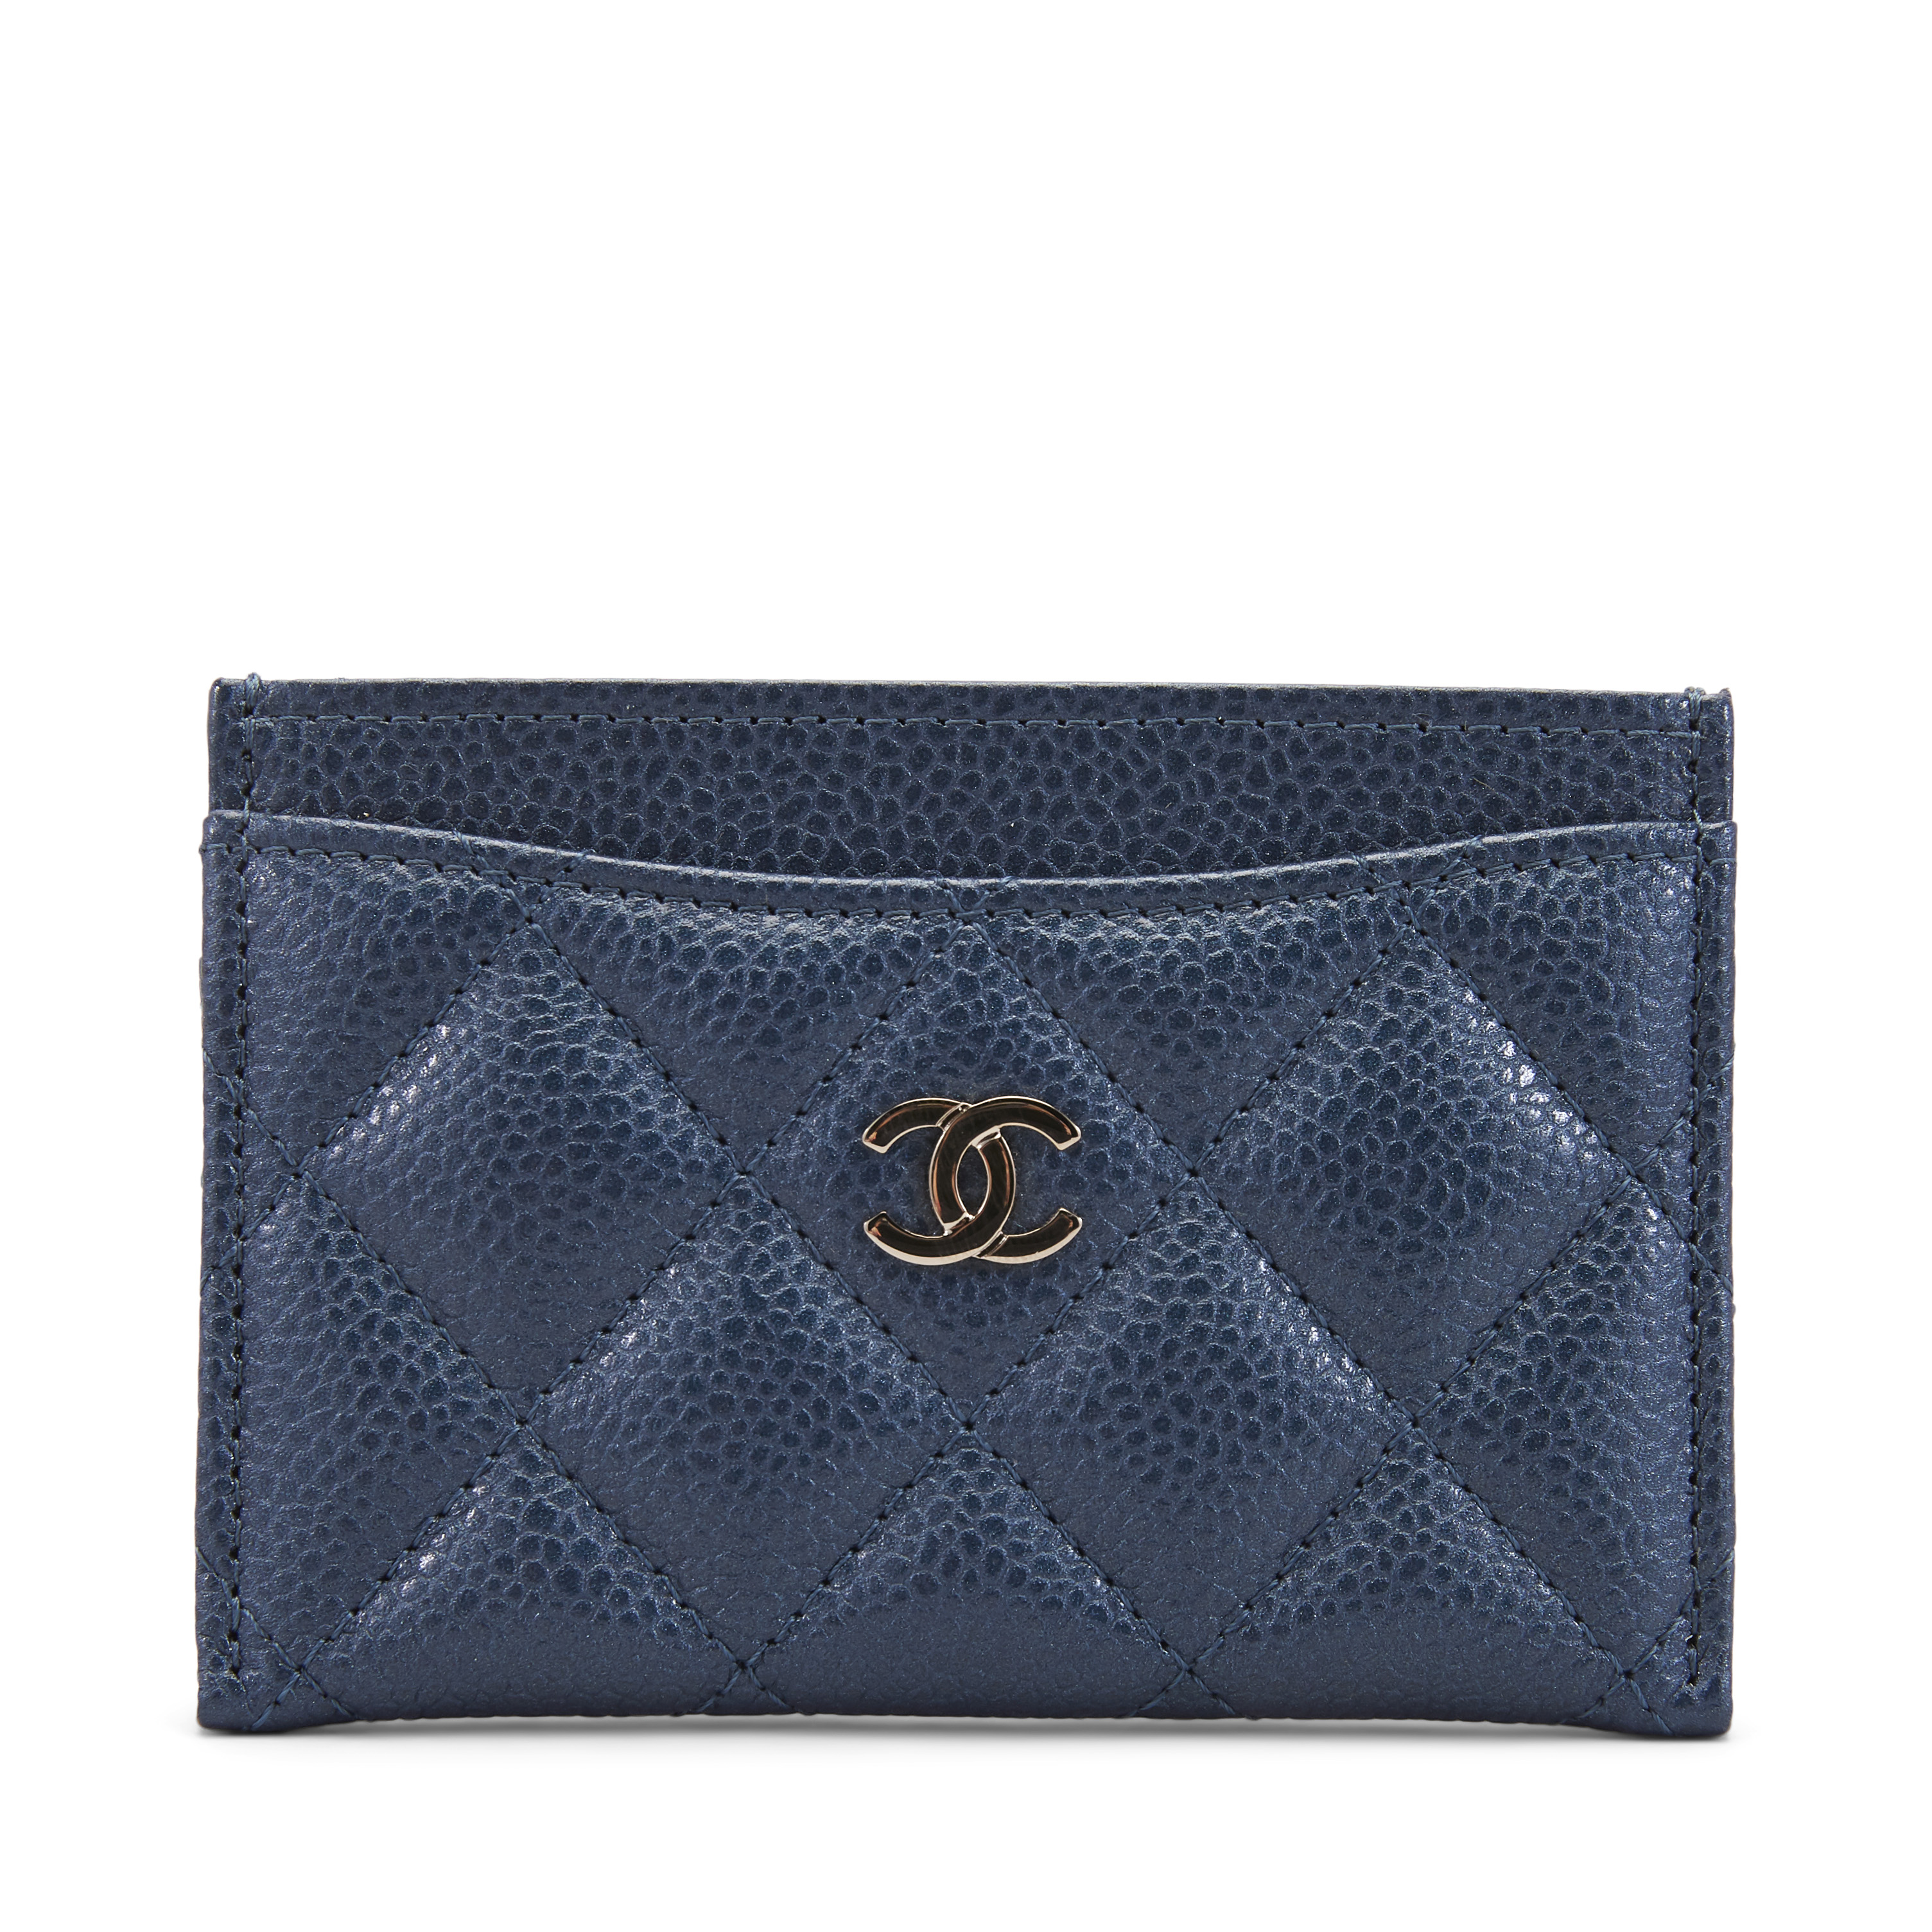 Shop CHANEL TIMELESS CLASSICS Unisex Leather Small Wallet Card Holders by  accelerer  BUYMA